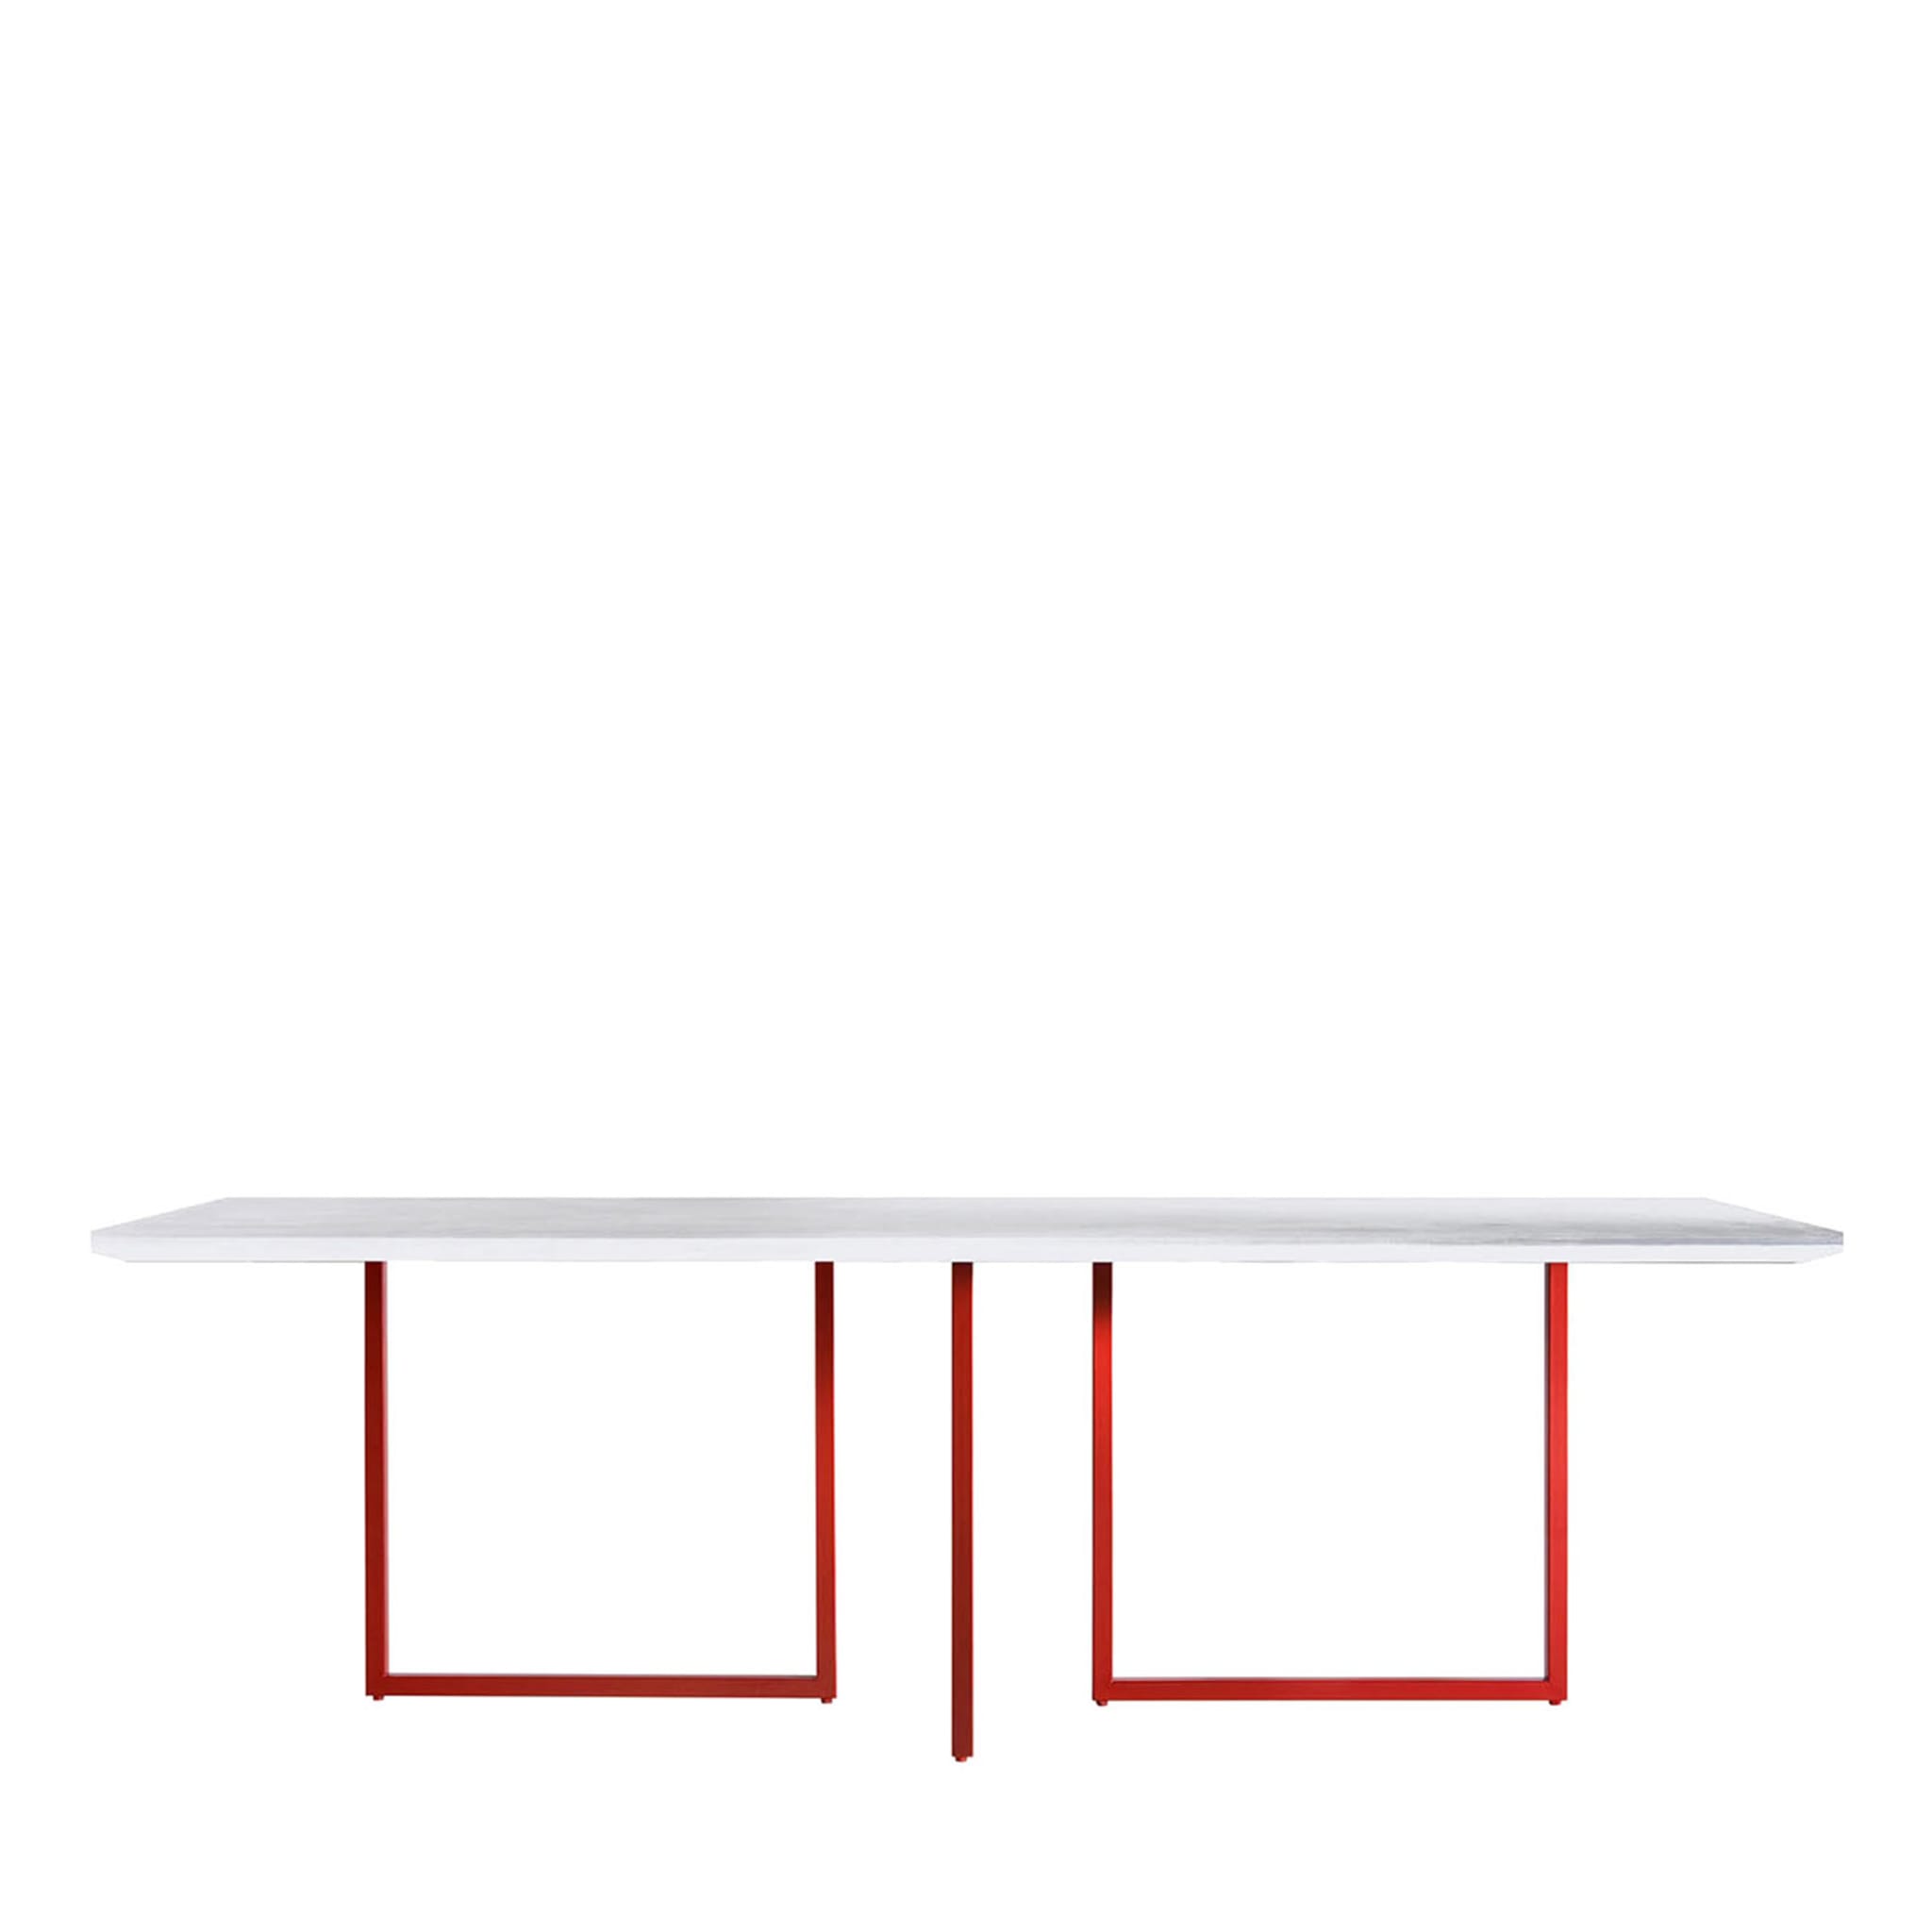 Gazelle White & Red Table by Park Associati - Main view